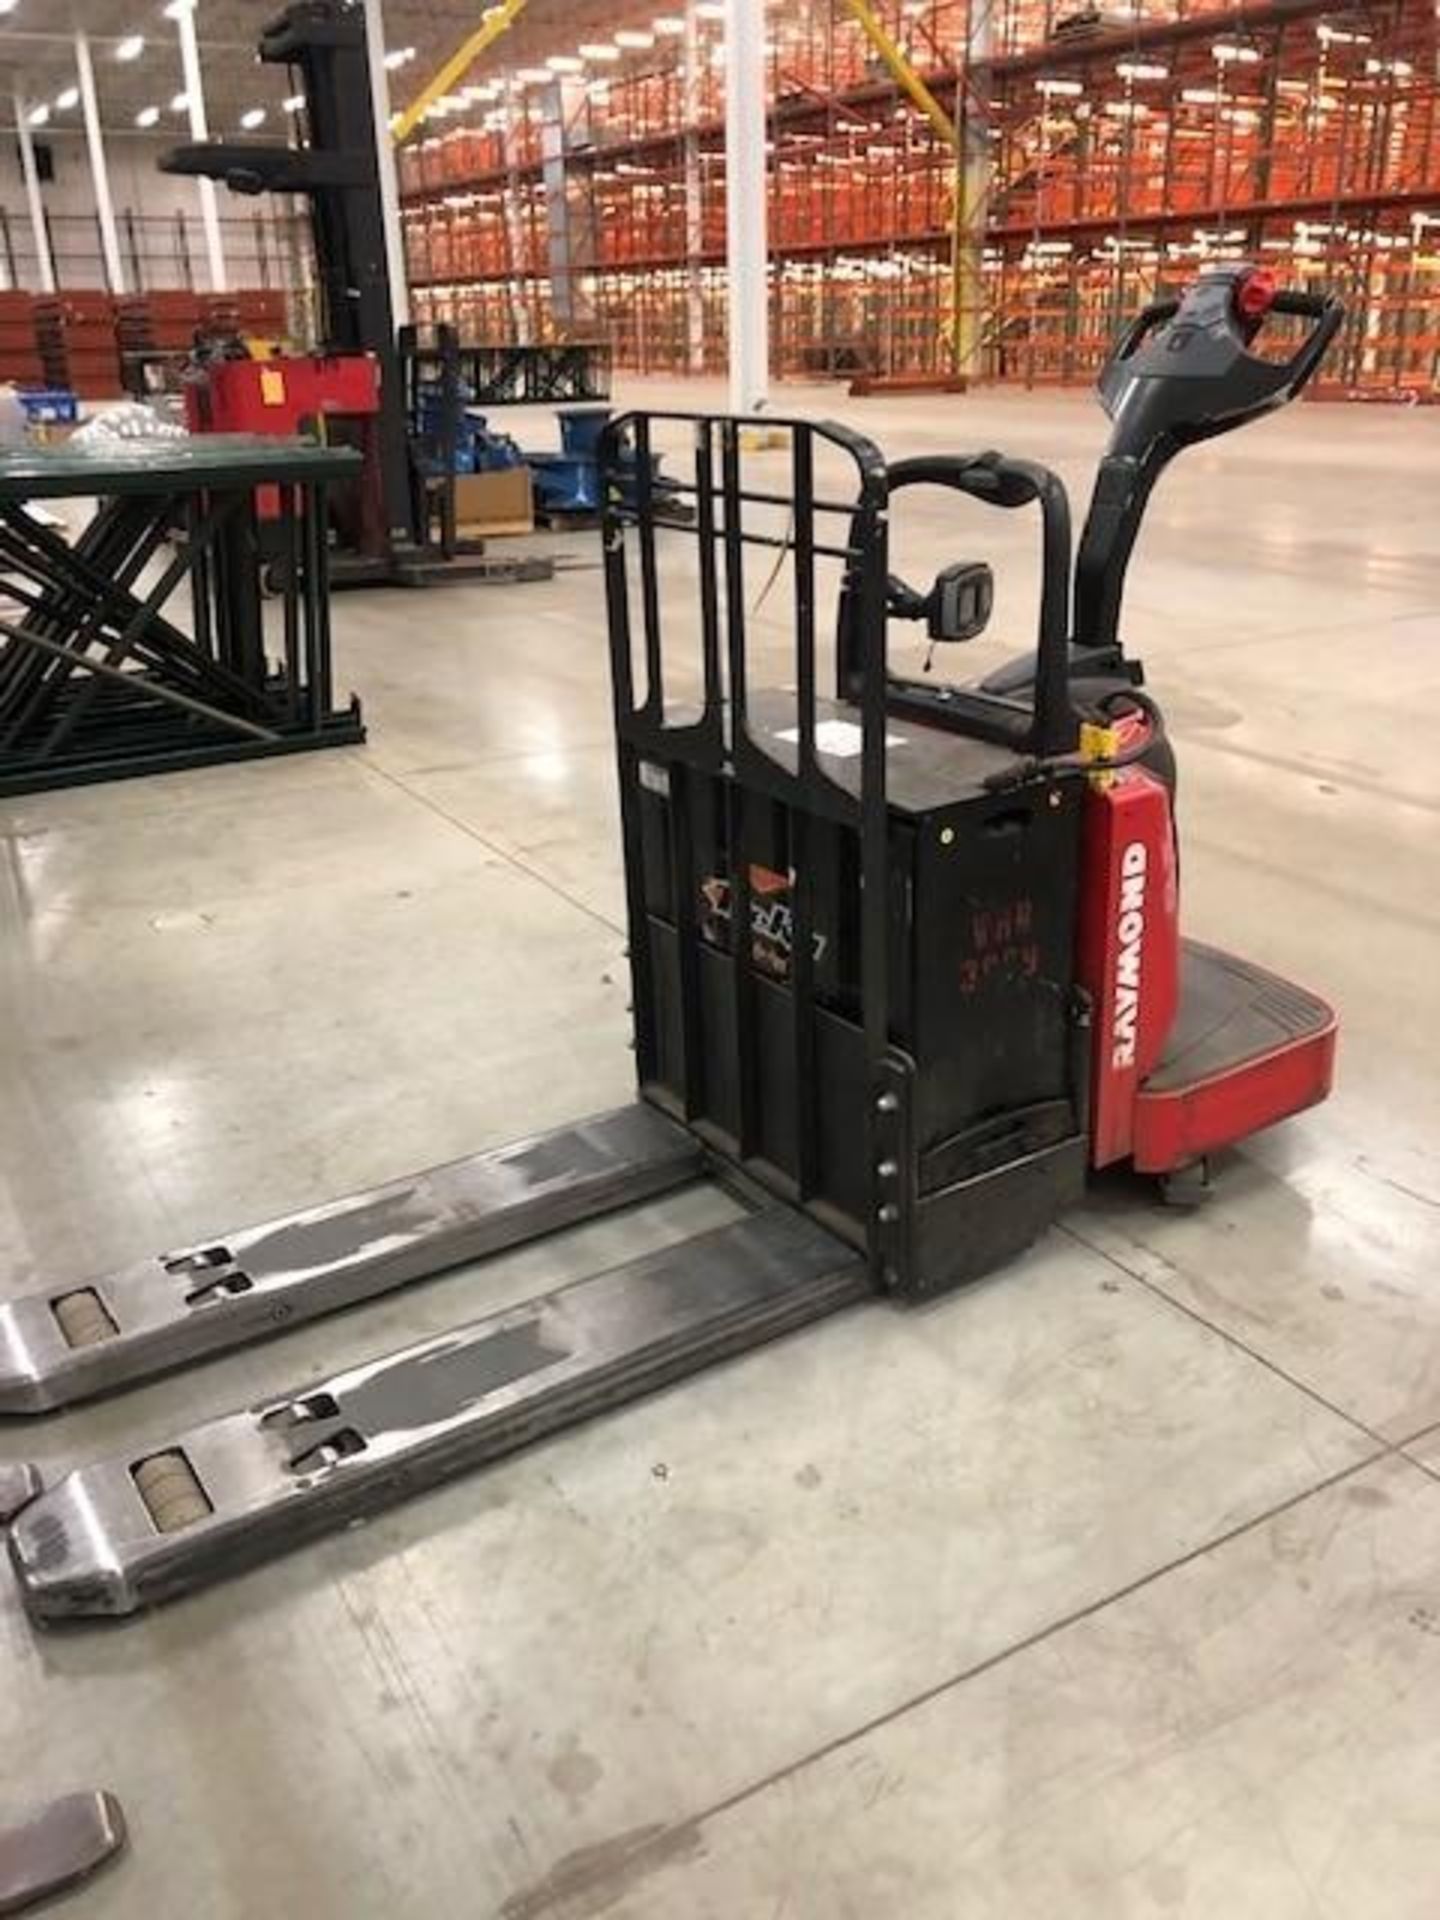 2013 RAYMOND 6,000 LB. CAPACITY ELECTRIC PALLET TRUCK; MODEL 8410, S/N 841-13-17109, WITH IWAREHOUSE - Image 7 of 8